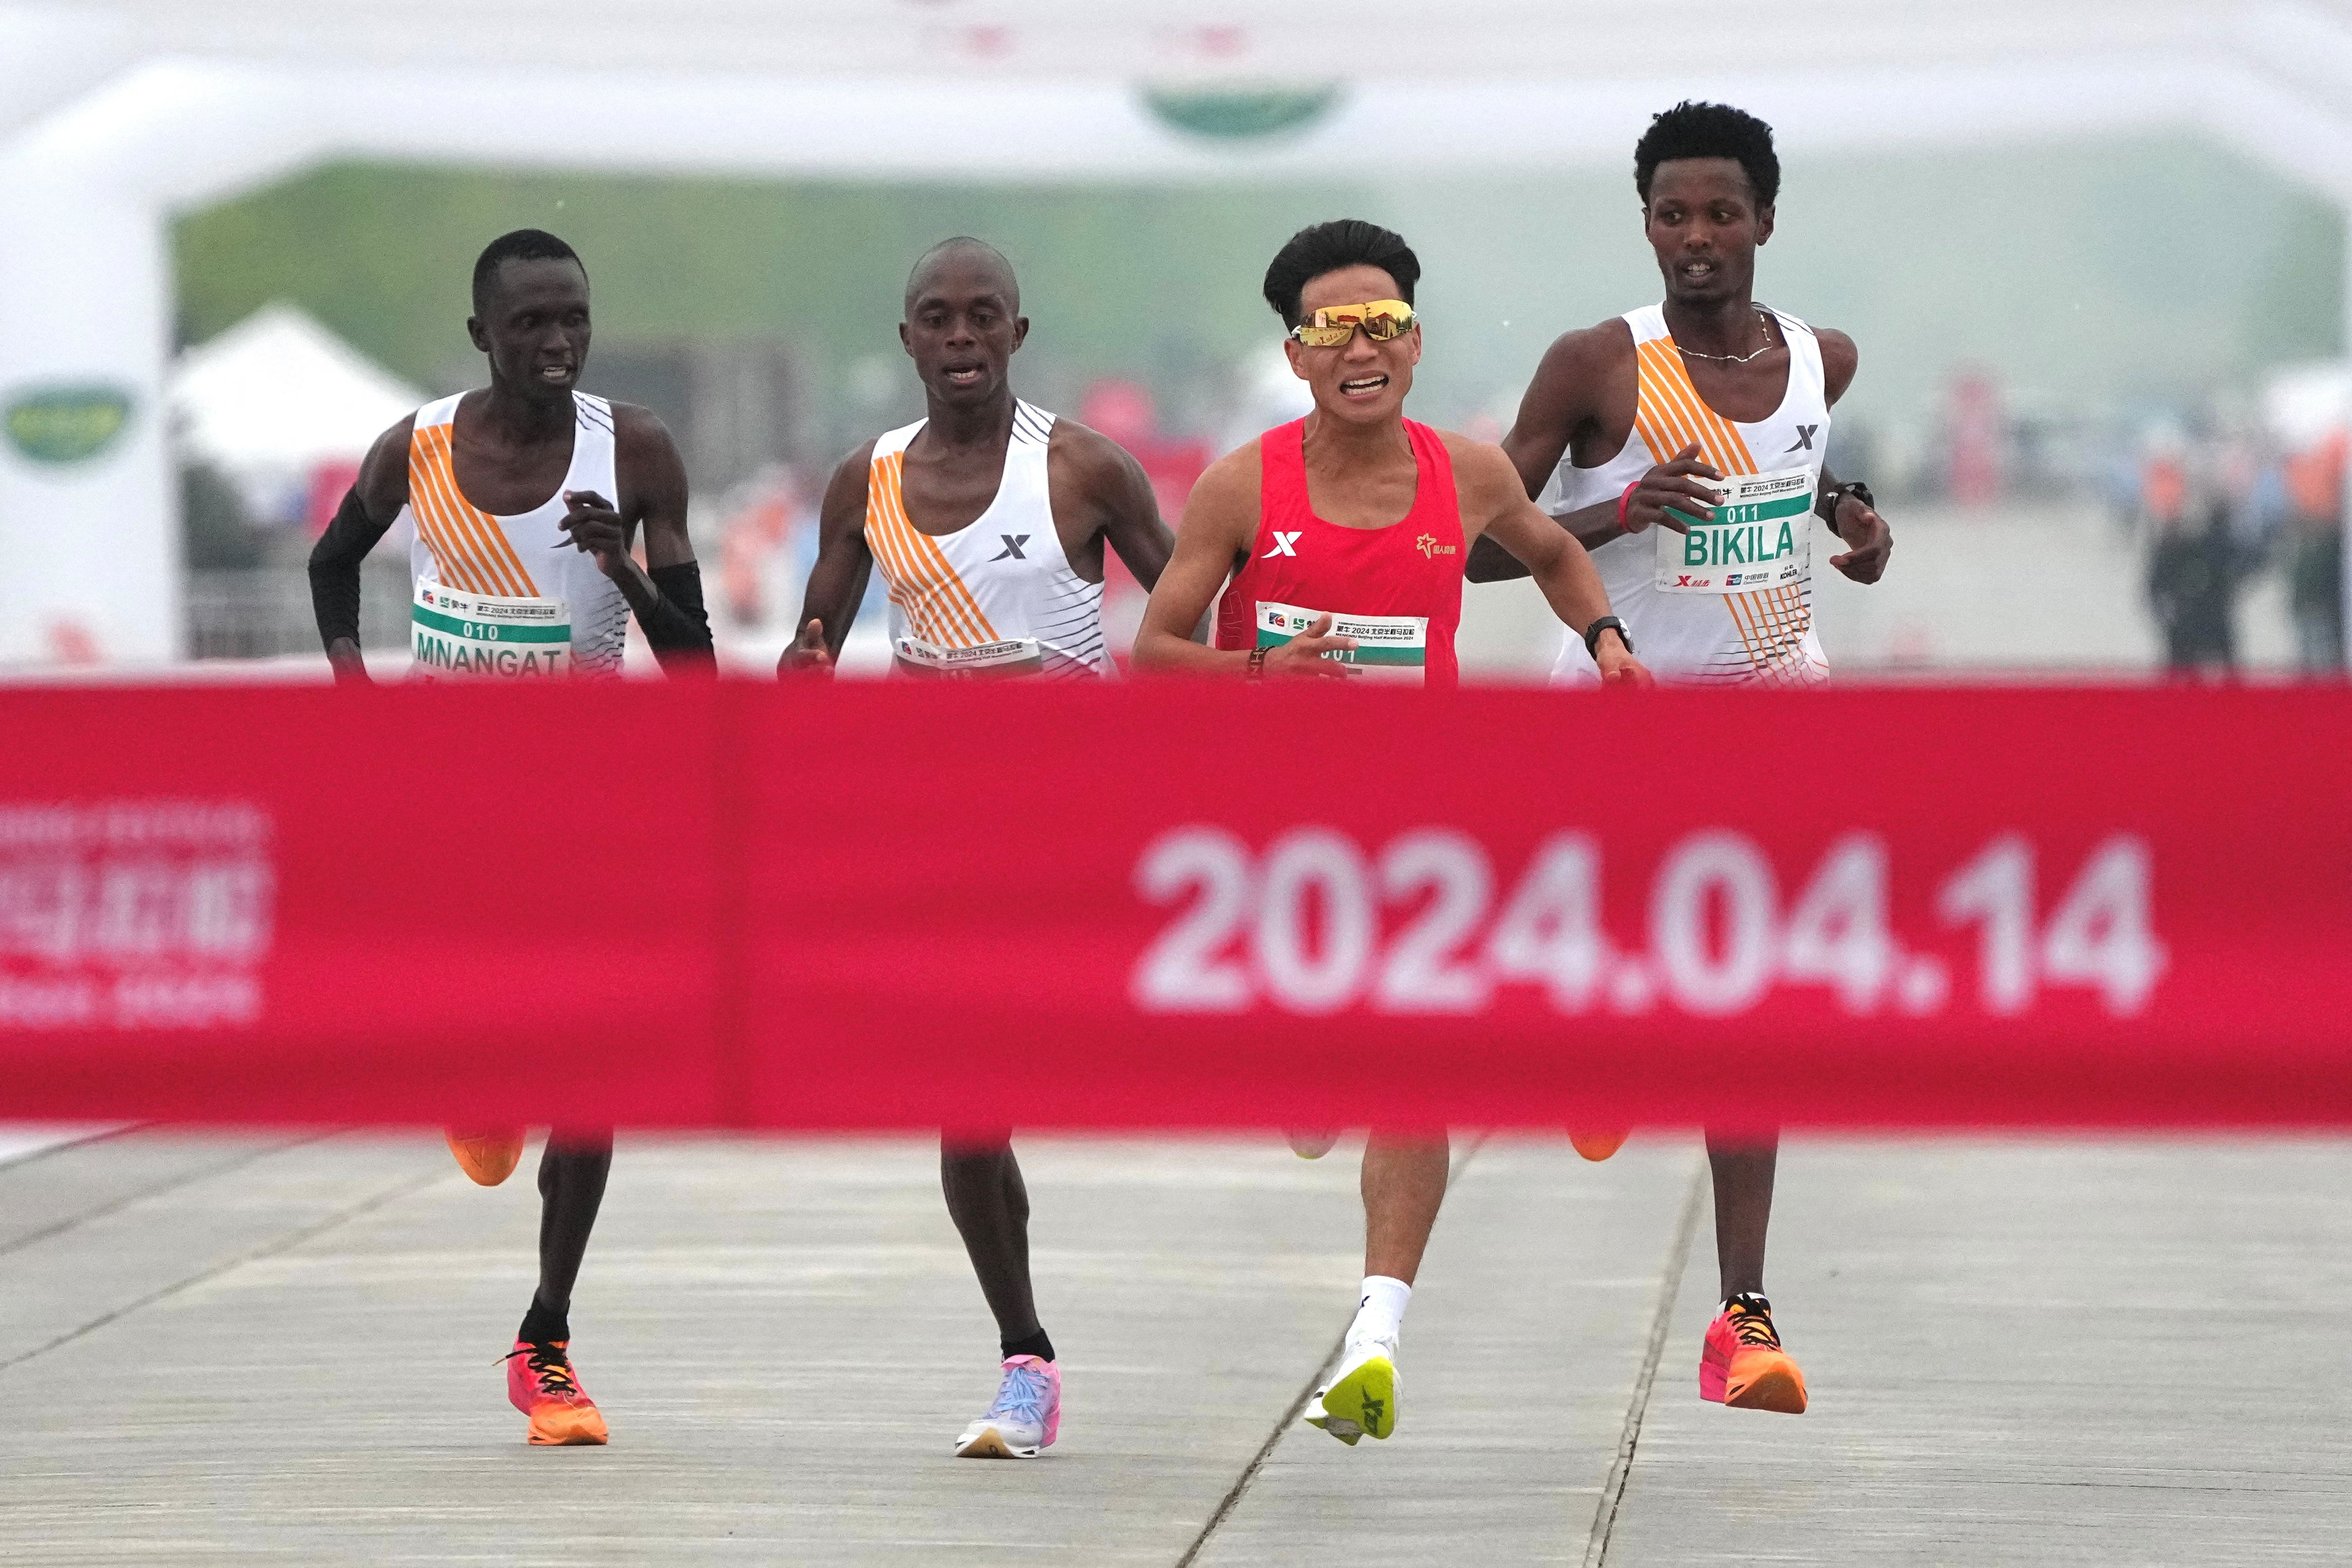 The Chinese runner crossed the line first, and then the uproar began